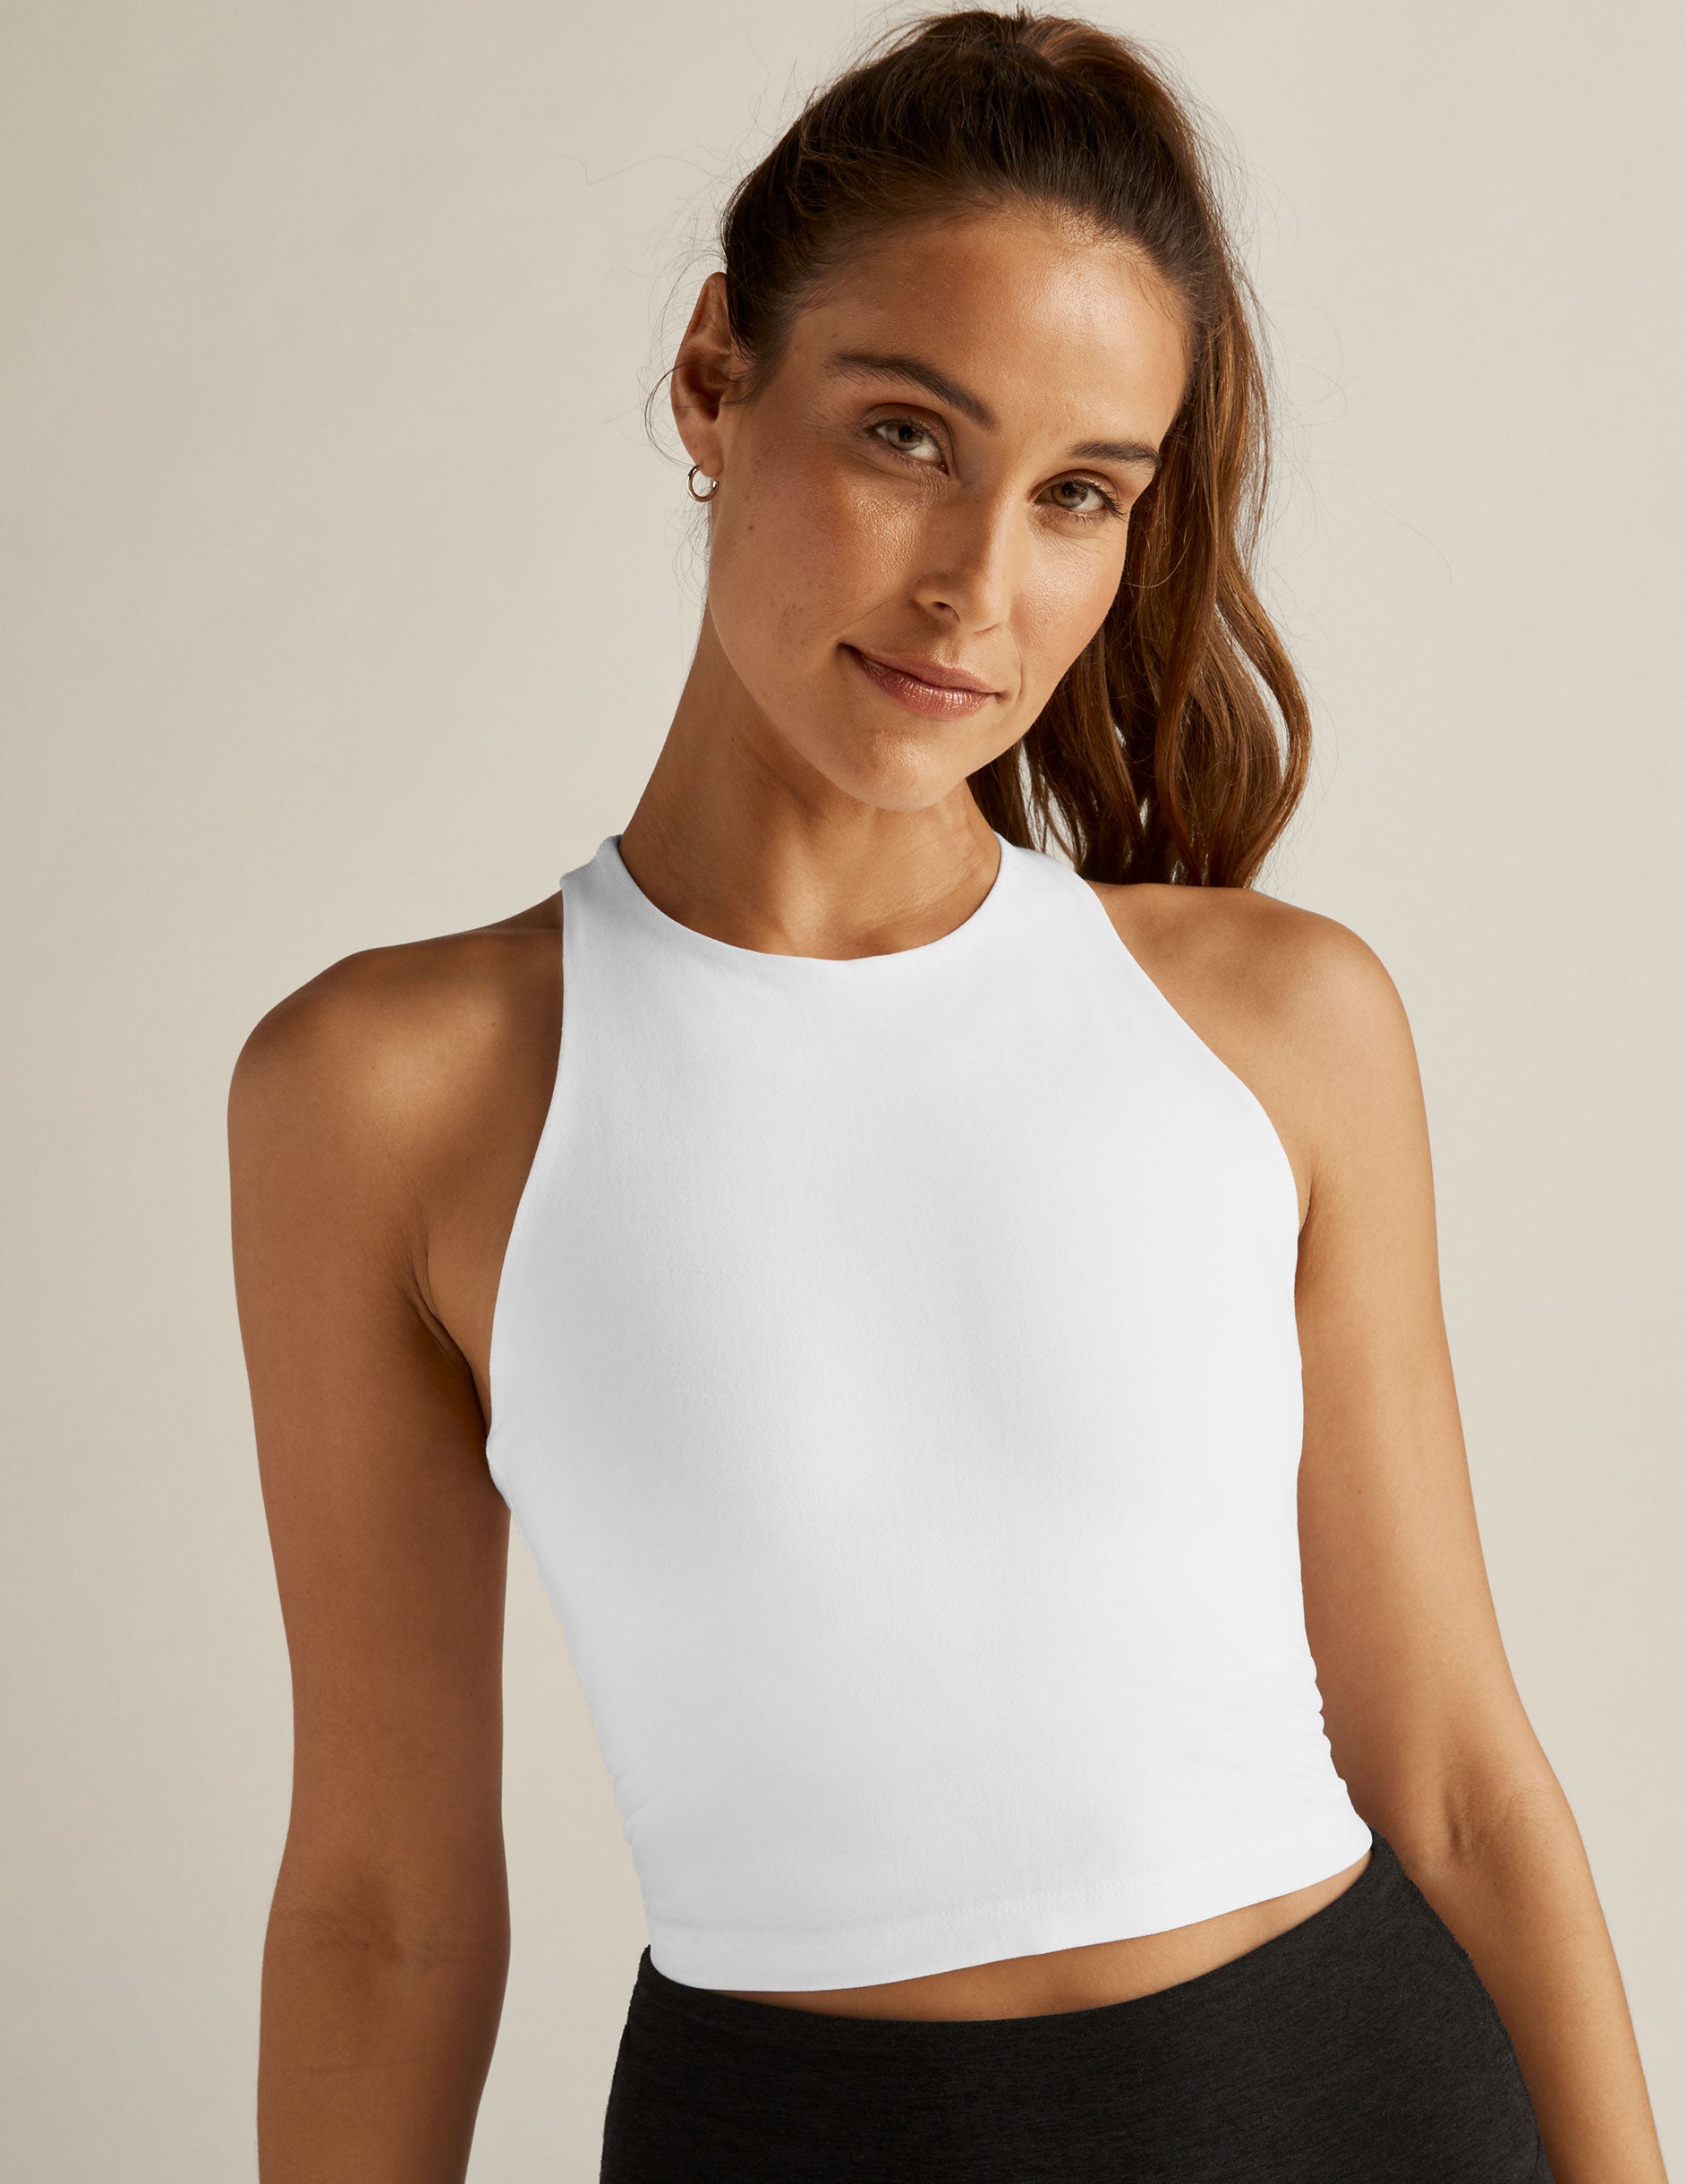 Beyond Yoga Spacedye Square Neck Cropped Bra Top  Urban Outfitters Mexico  - Clothing, Music, Home & Accessories